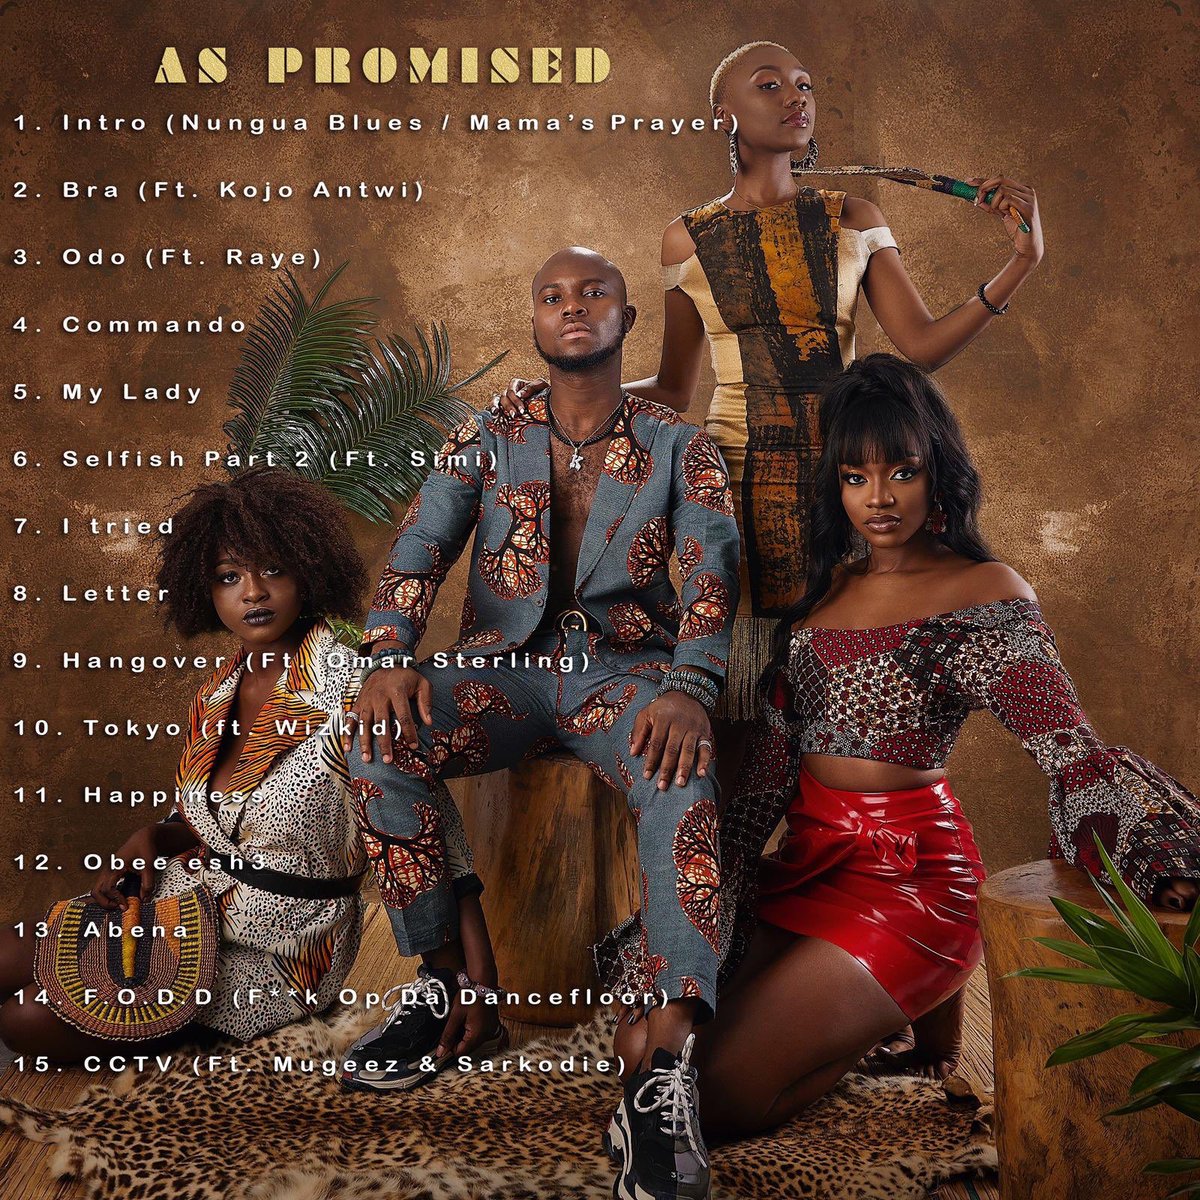 Finally @IamKingPromise #Aspromised album is out now - kingpromisemusic.lnk.to/AsPromised

Stream #AsPromised here ✌🏽

Favorite is #commando 🔥🔥🔥